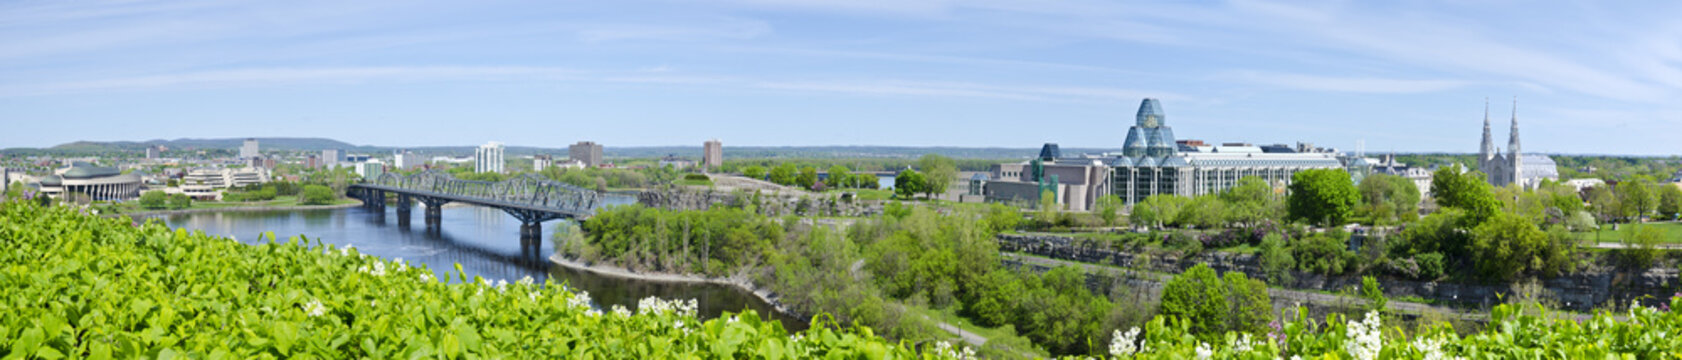 Panorama Seen from Parliament Hill Ottawa Canada